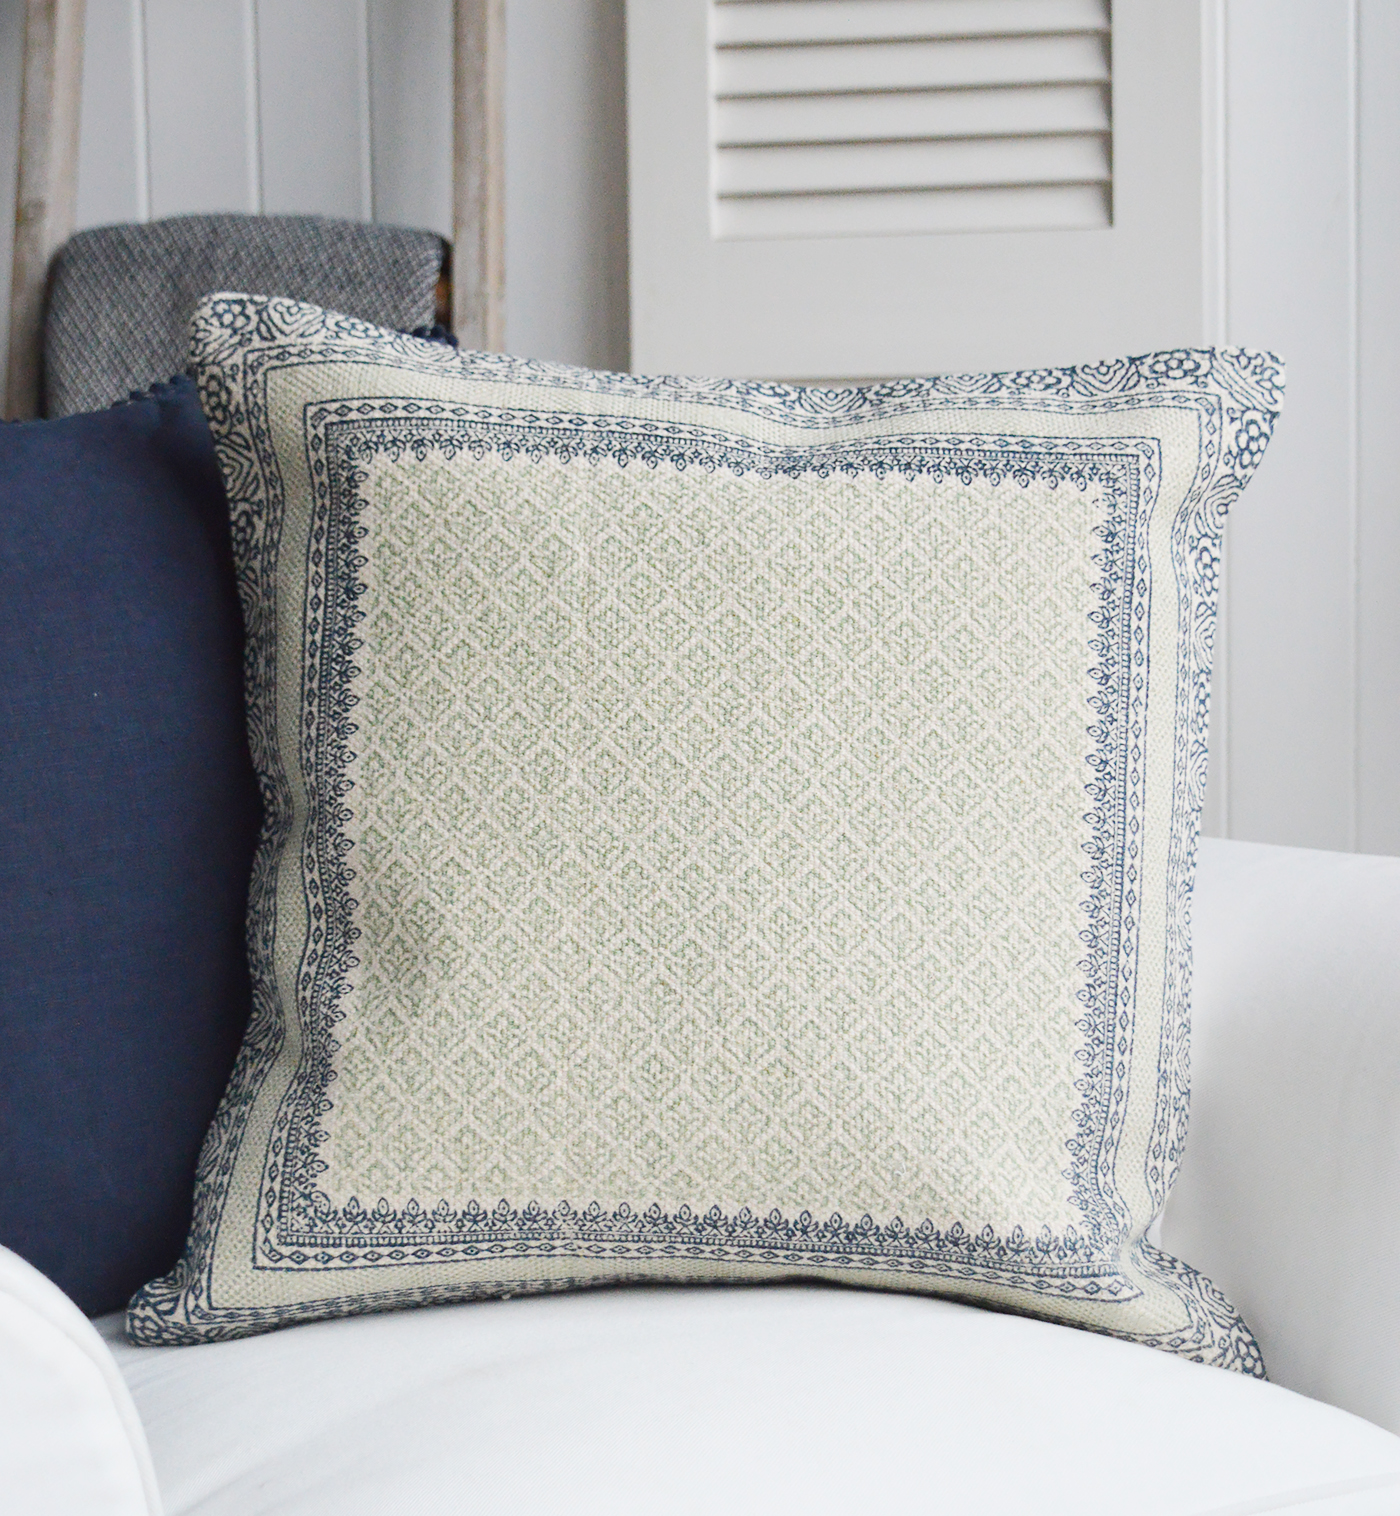 Quincy cushion cover in french grey and navy for New England interiors for coastal, country and Modern farmhouse homes